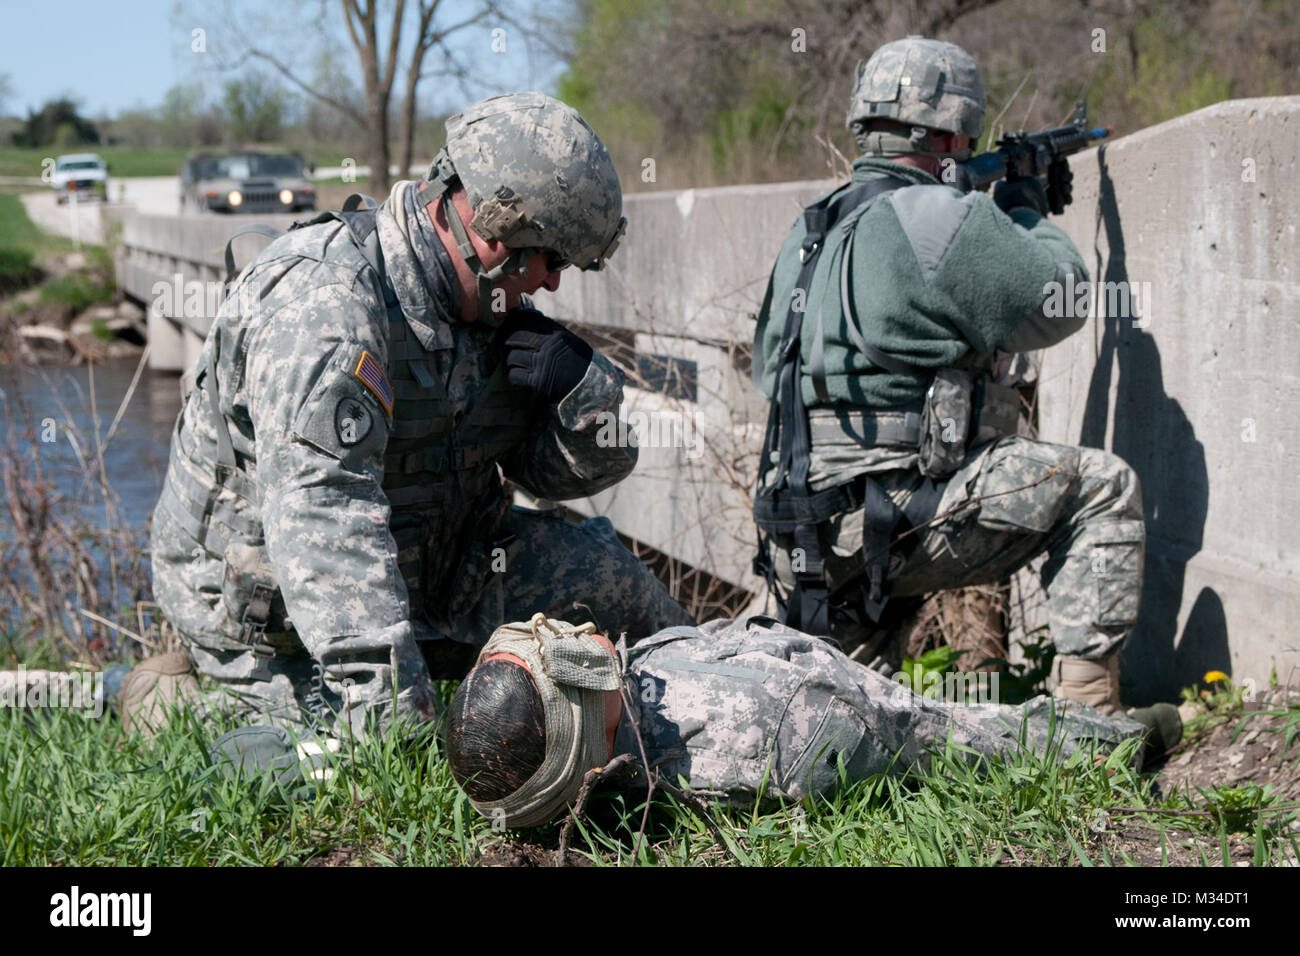 Soldiers from Company A, 700th Brigade Support Battalion, conduct first aid and medical evacuation exercises during their annual training at Camp Dodge, Iowa. The Oklahoma Army National Guard support battalion, headquartered in Norman, Oklahoma, trained from April 13-24, 2015, at the Camp Dodge Sustainment Training Center. The unit's Soldiers strengthened their assigned specialty skills as they trained on every aspect of their combined mission, to include logistical movement, resupply, medical operations and equipment maintenance. (Photo by Spc. Elijah Morlett, 145th Mobile Public Affairs Deta Stock Photo